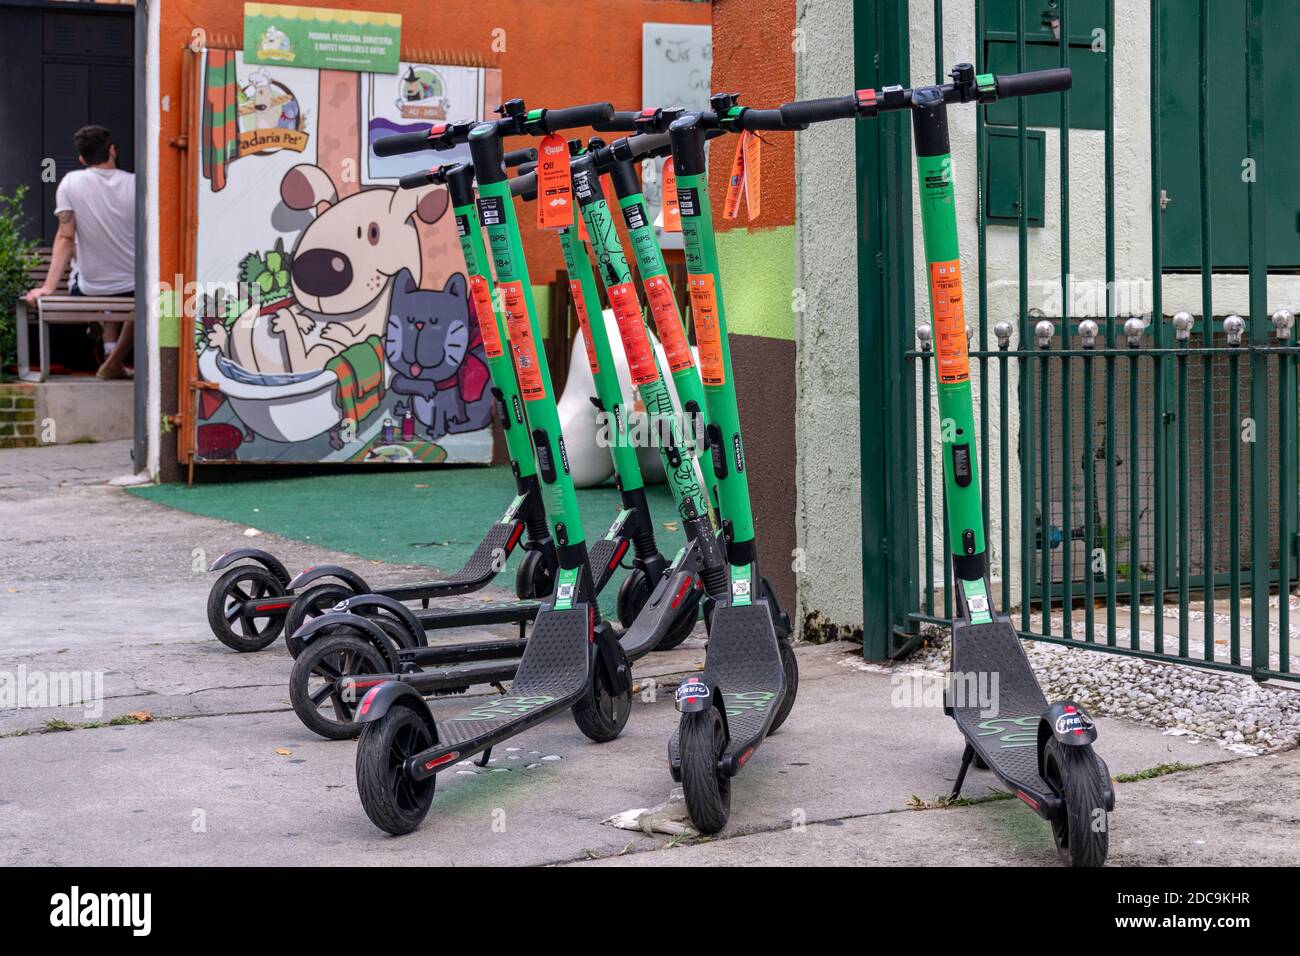 Sao Paulo, Sao Paulo/Brazil, on march 24, 2019: Various electric scooters Grin (waiting to be rented), in Mateus Grou street, Pinheiros neighborhood. Stock Photo